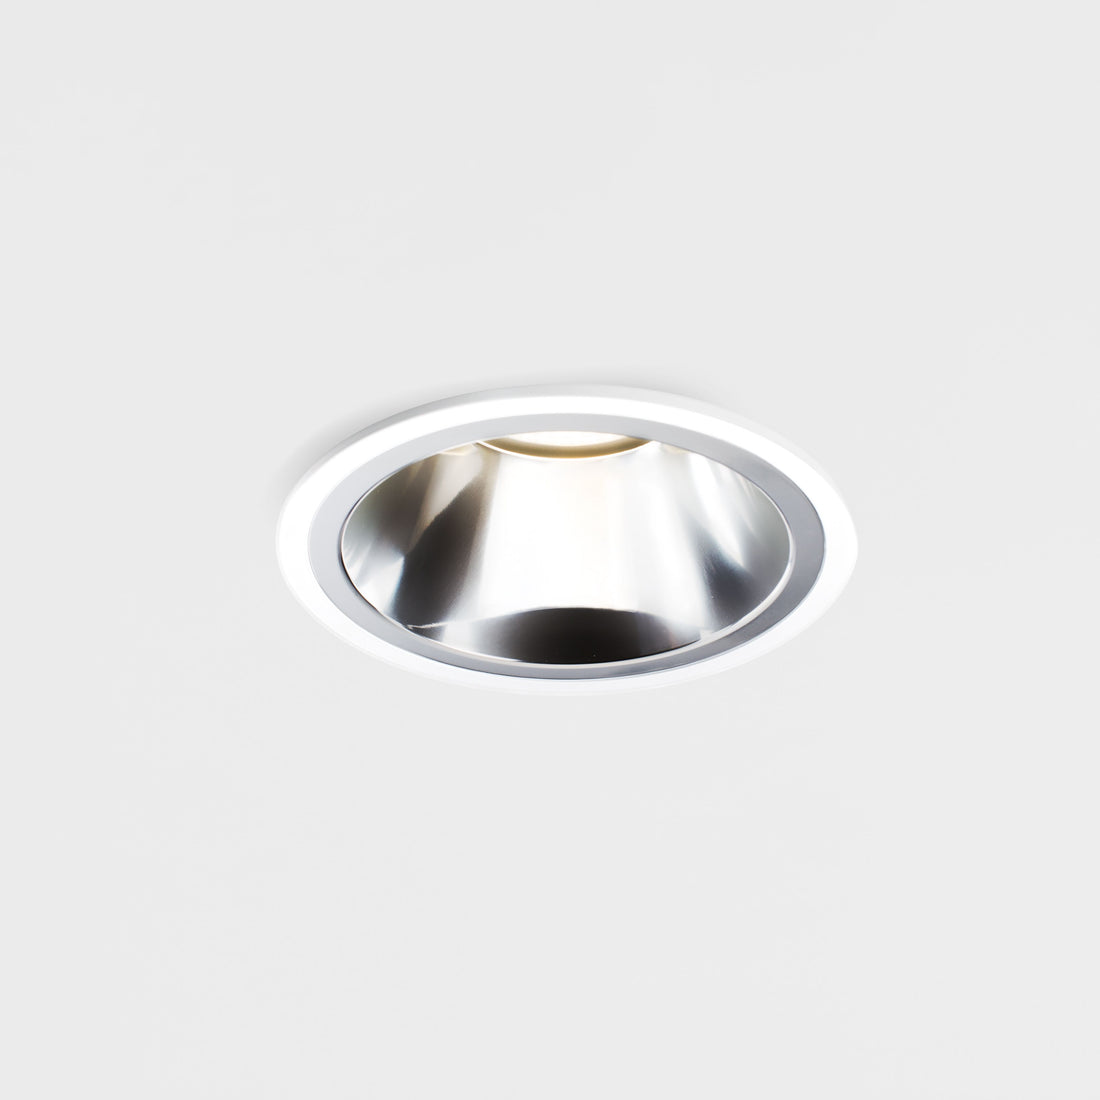 Architectural Commercial 13W LED Down Light.  White or Black Finish.